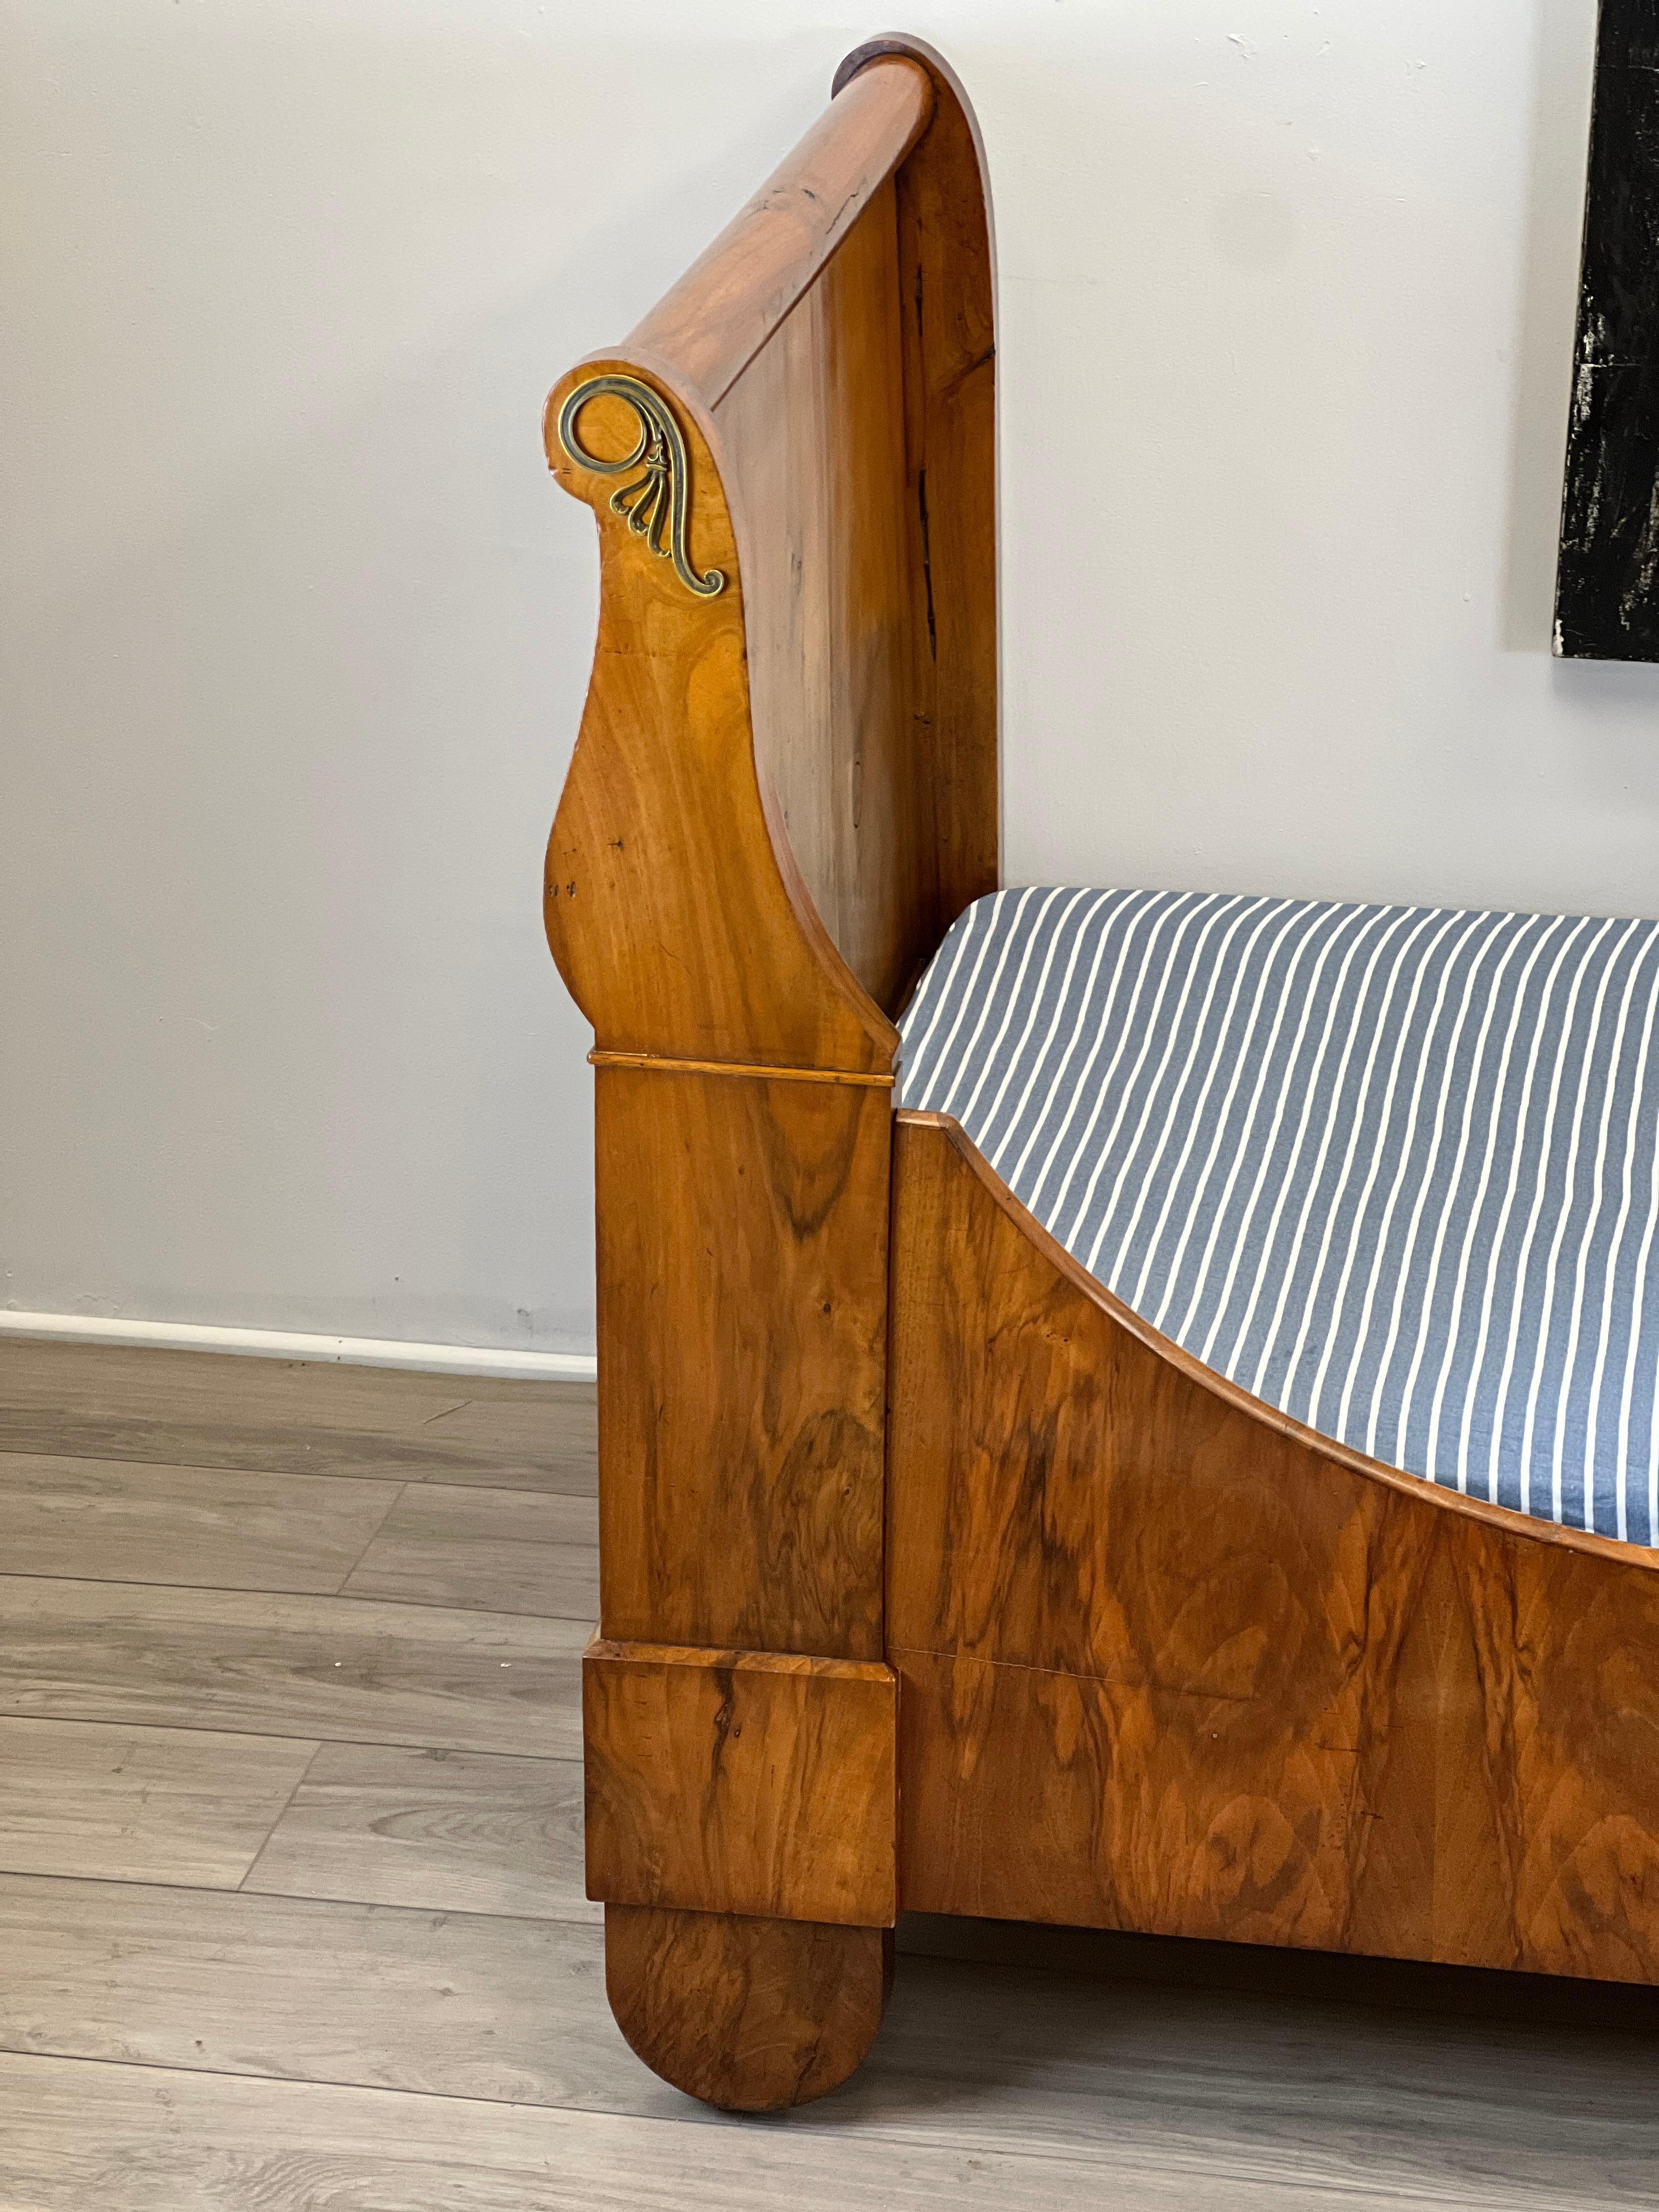 Featured is a very handsome Period French Louis Philippe daybed constructed of walnut. The bed consists of seven total parts. A head and foot end, two side rails, a bottom mattress support board and two bed slats. Also the bed frame will come with